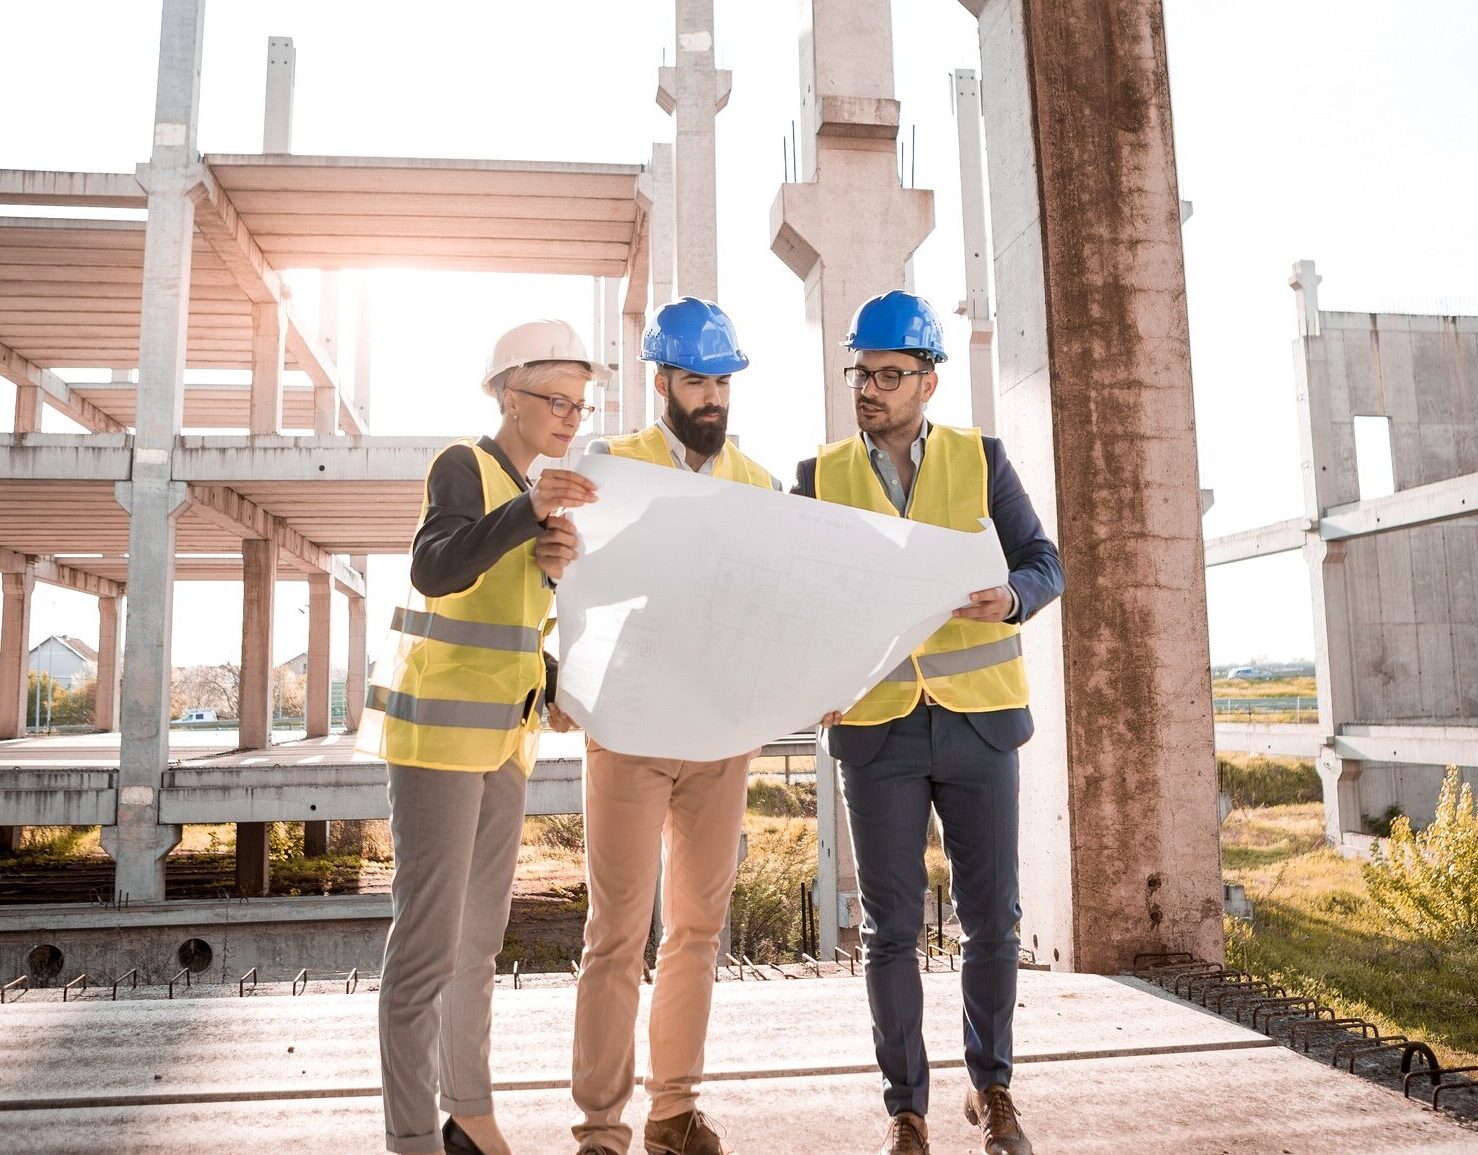 3 men in hard hats and vests stand in front of a building that is under construction all looking at a building plan on paper